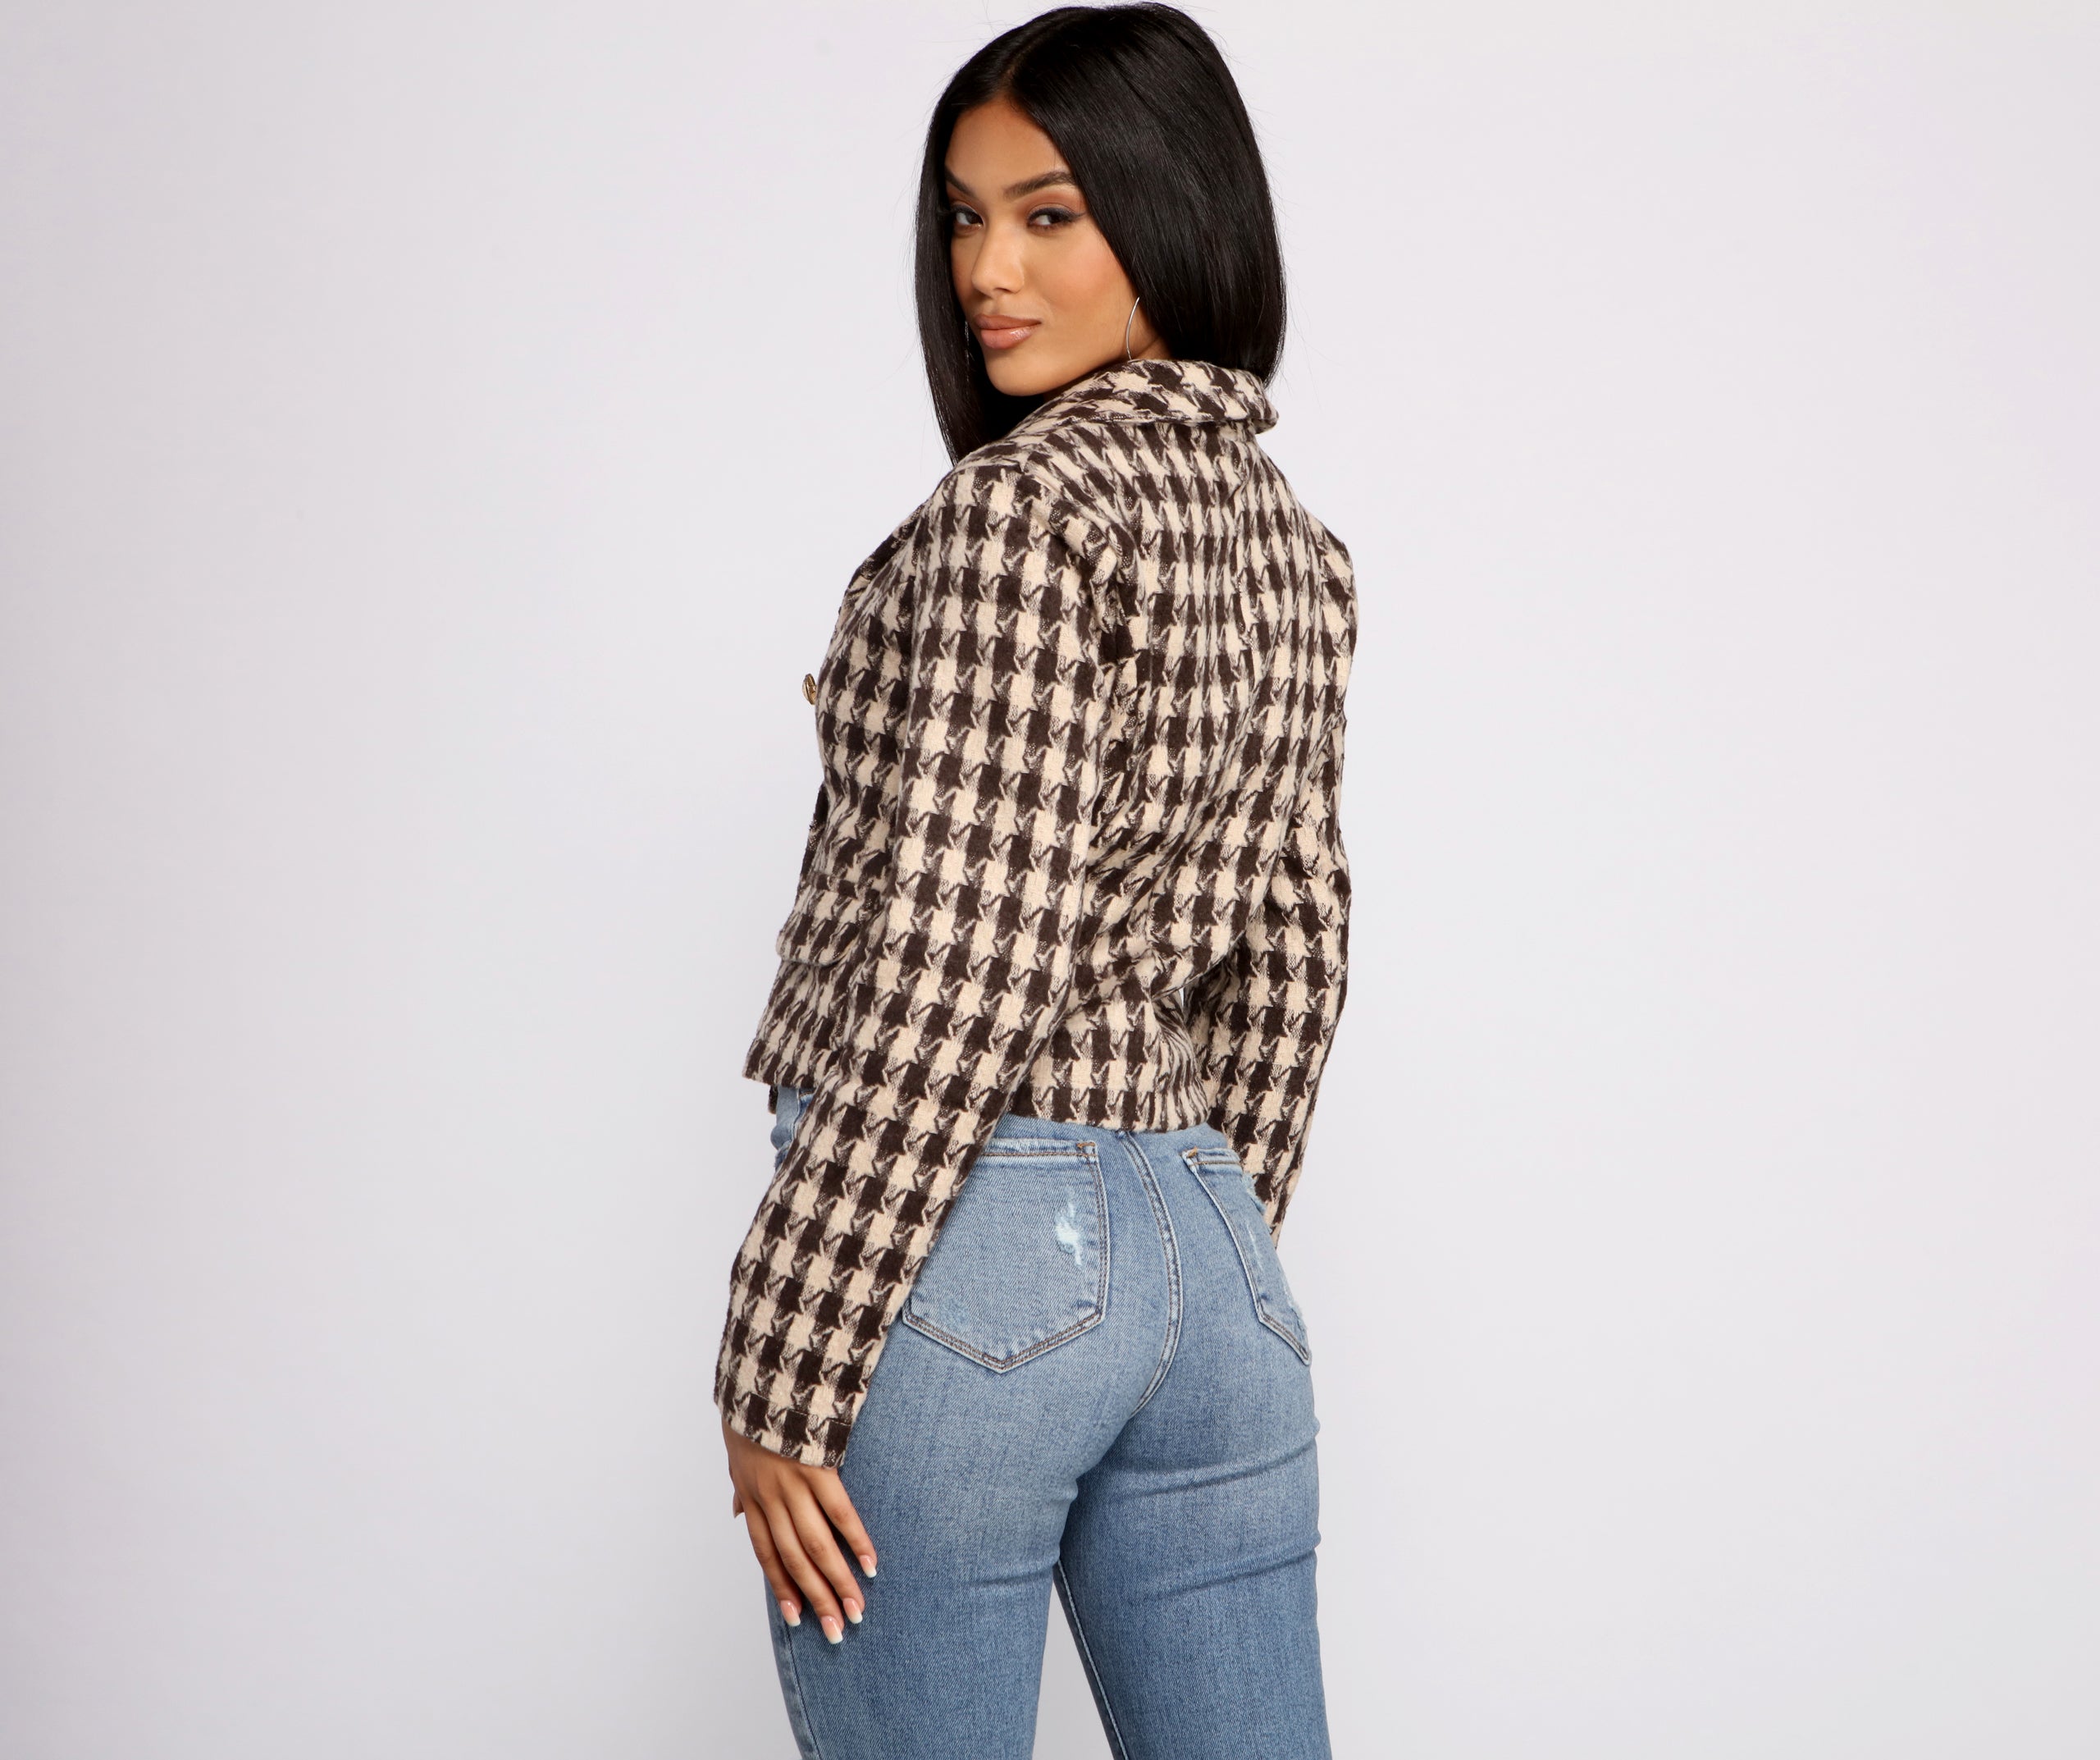 Poised and Professional Houndstooth Cropped Blazer